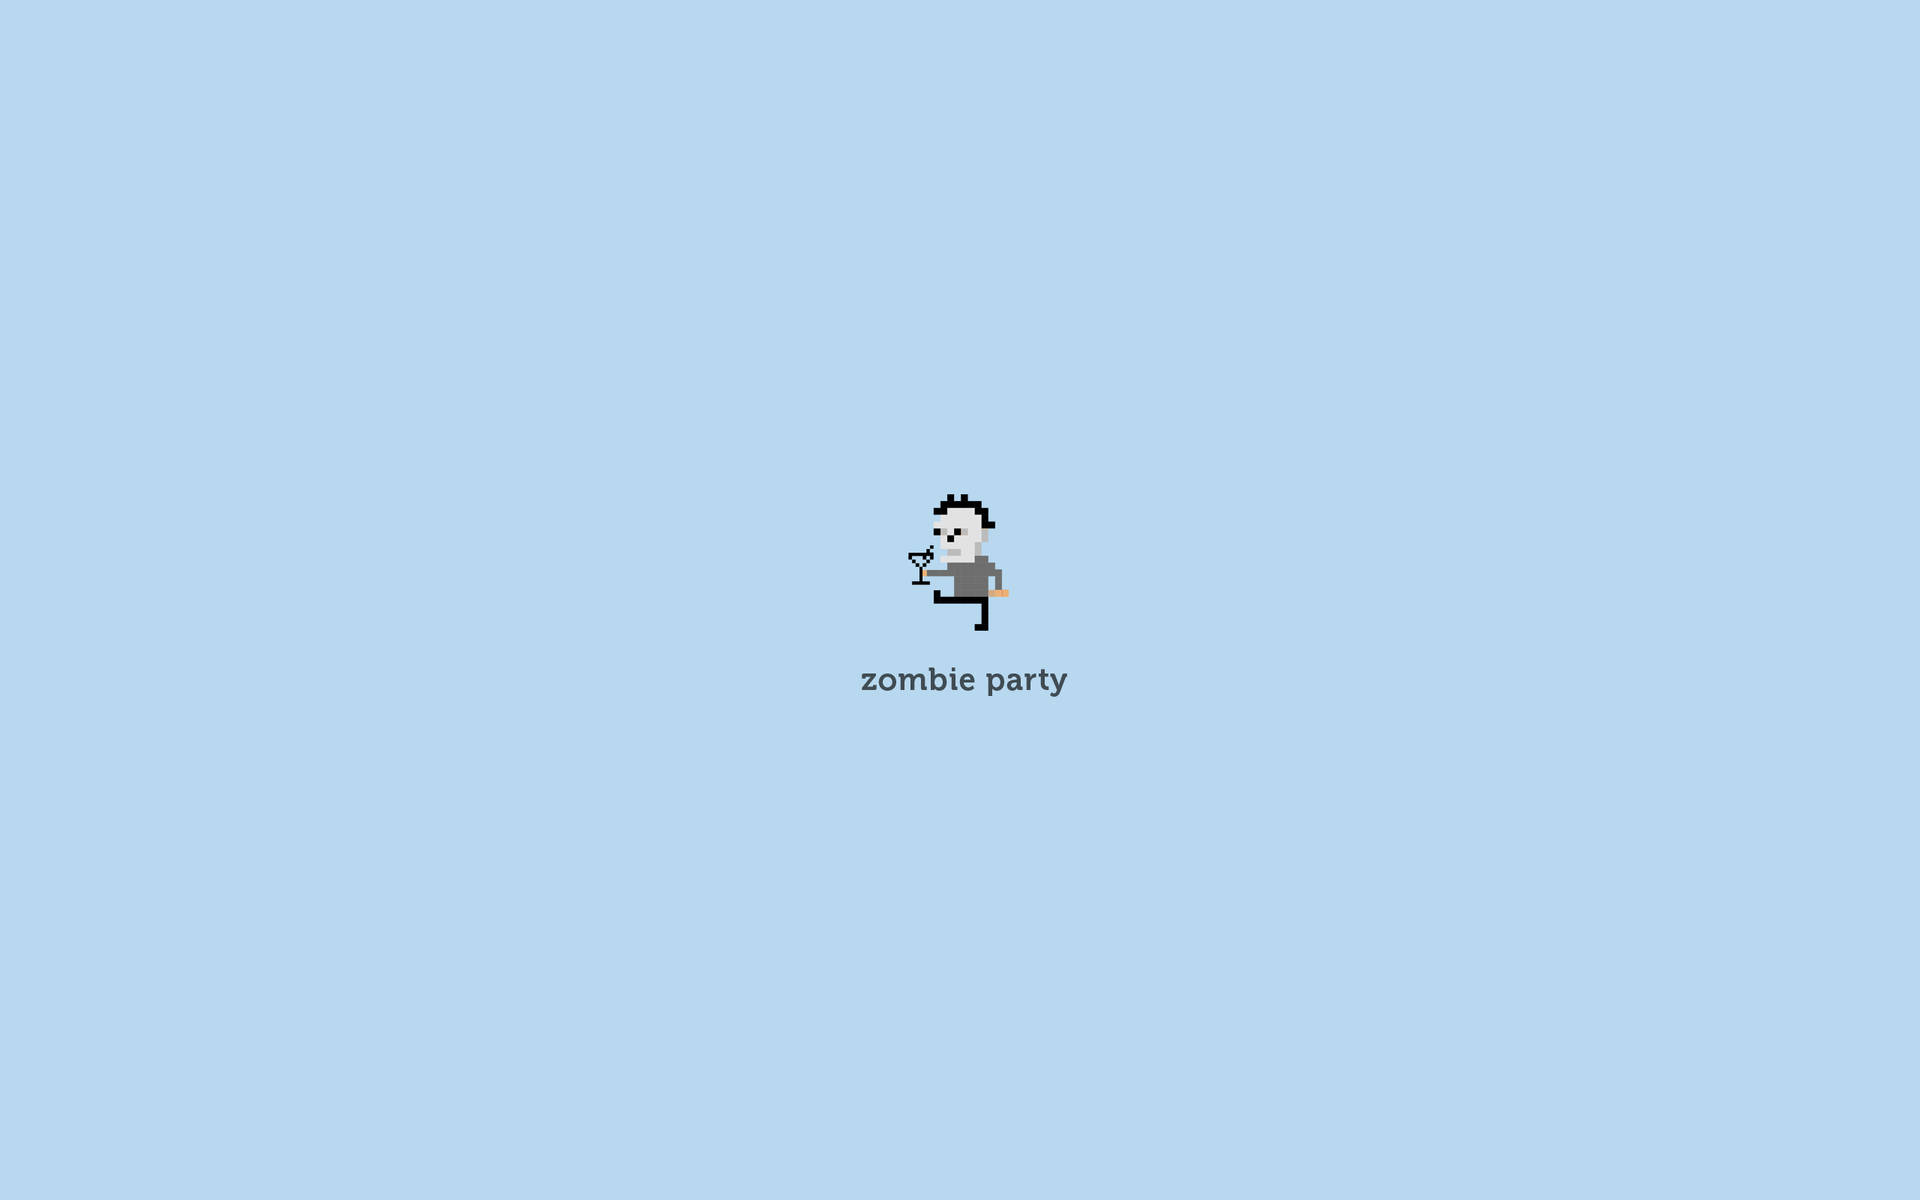 The Tiny Zombie Hidden In The Minimalist Landscape Background